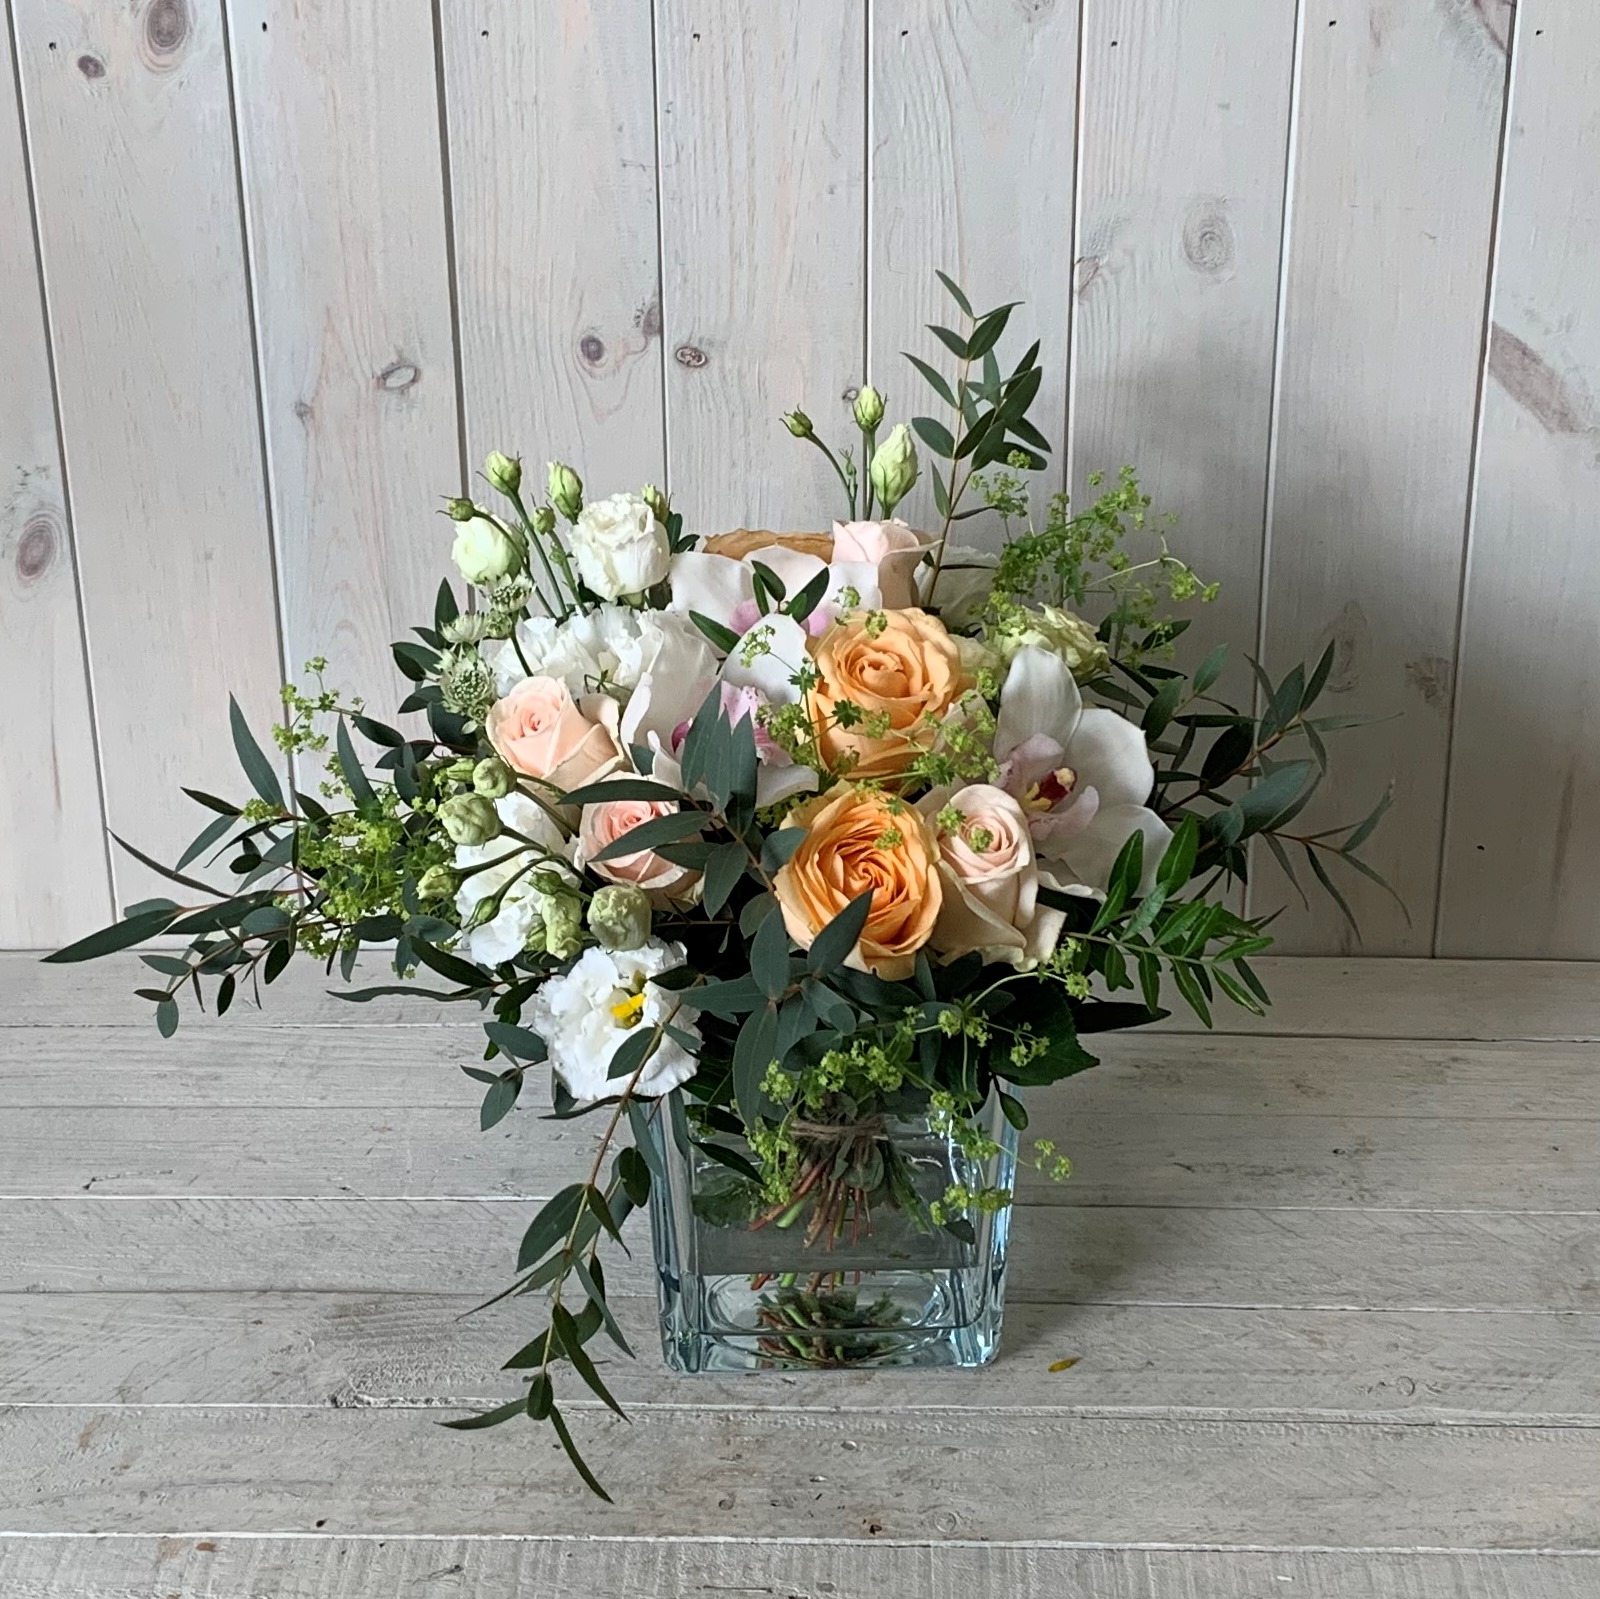 Flower arrangement in Peaches and Creams available to order to collect and for delivery in Dublin city and county.